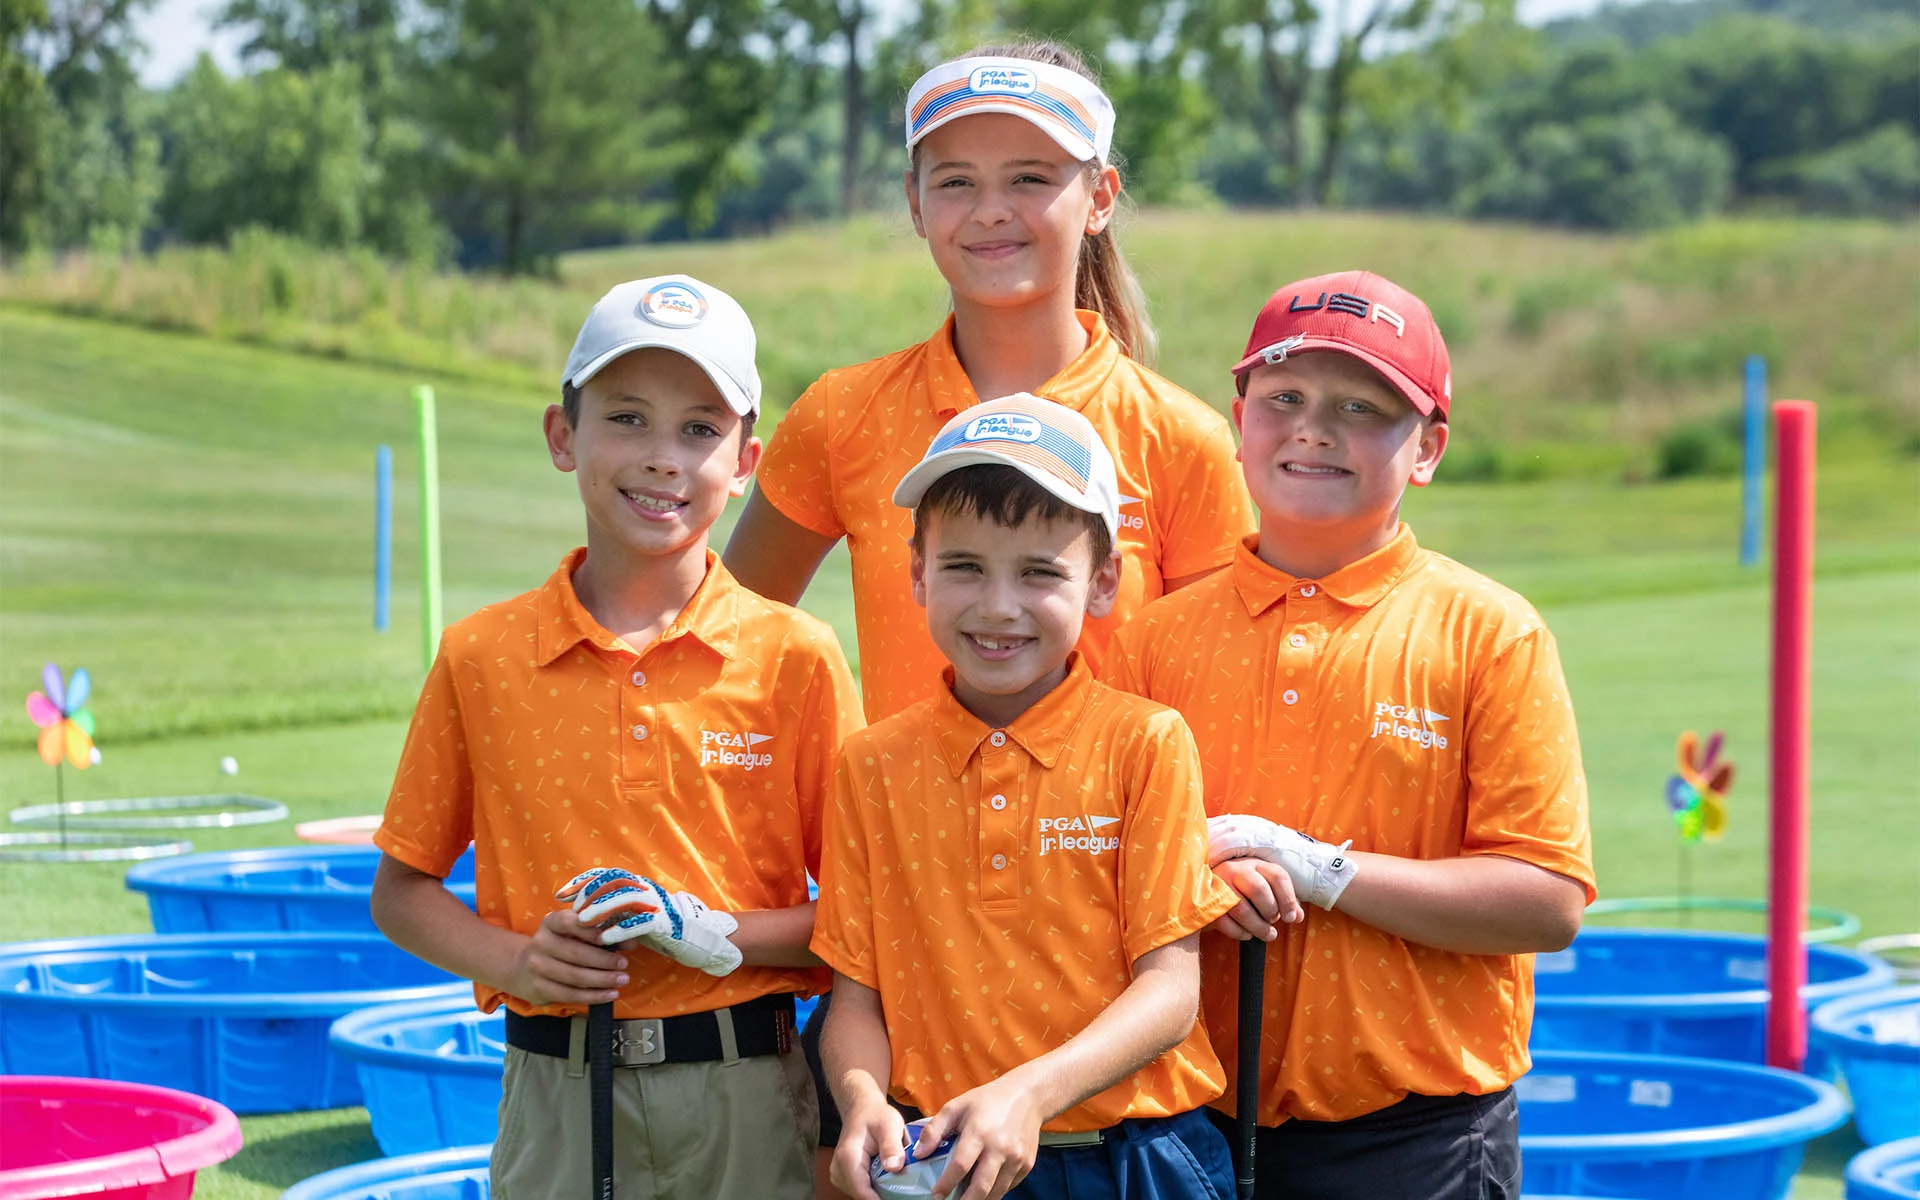 Immerse your child in engaging golf experiences with a membership at an Invited Club – Image of four young golfers in front of specially designed game buckets for skill improvement and entertainment.